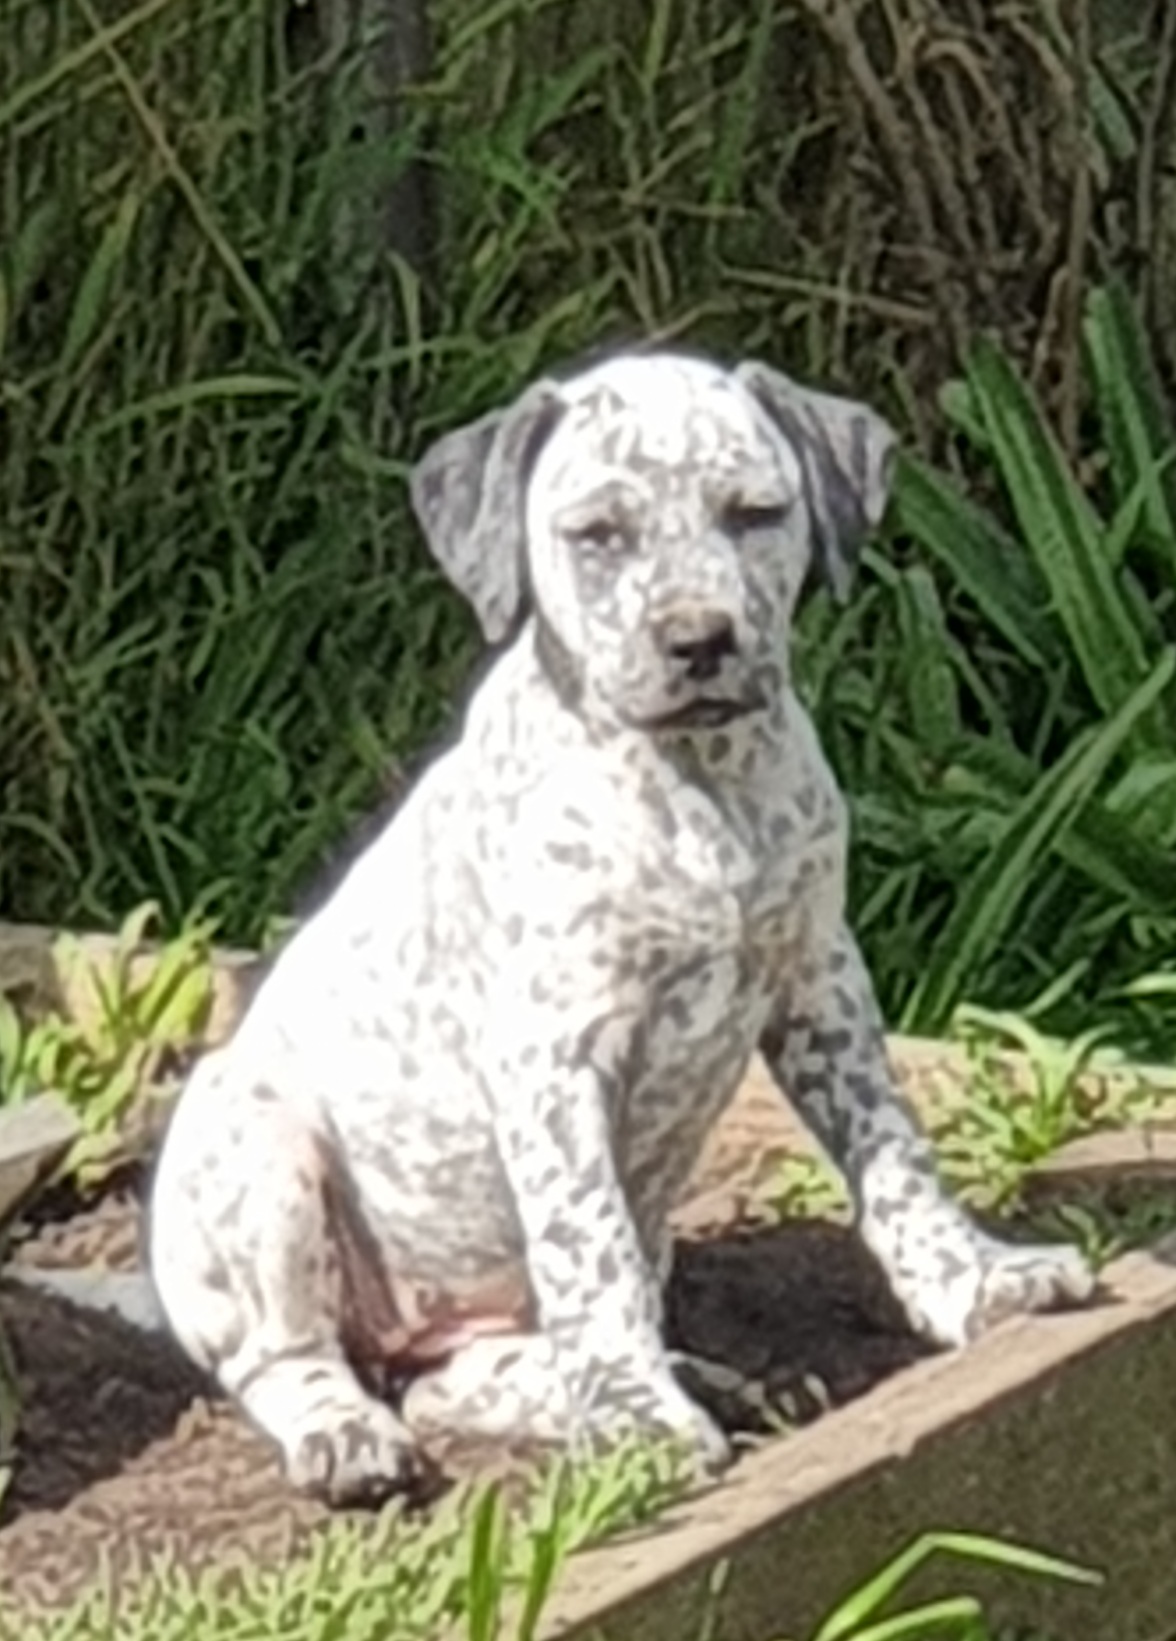 Bull Arab x GSP puppies looking for their forever home